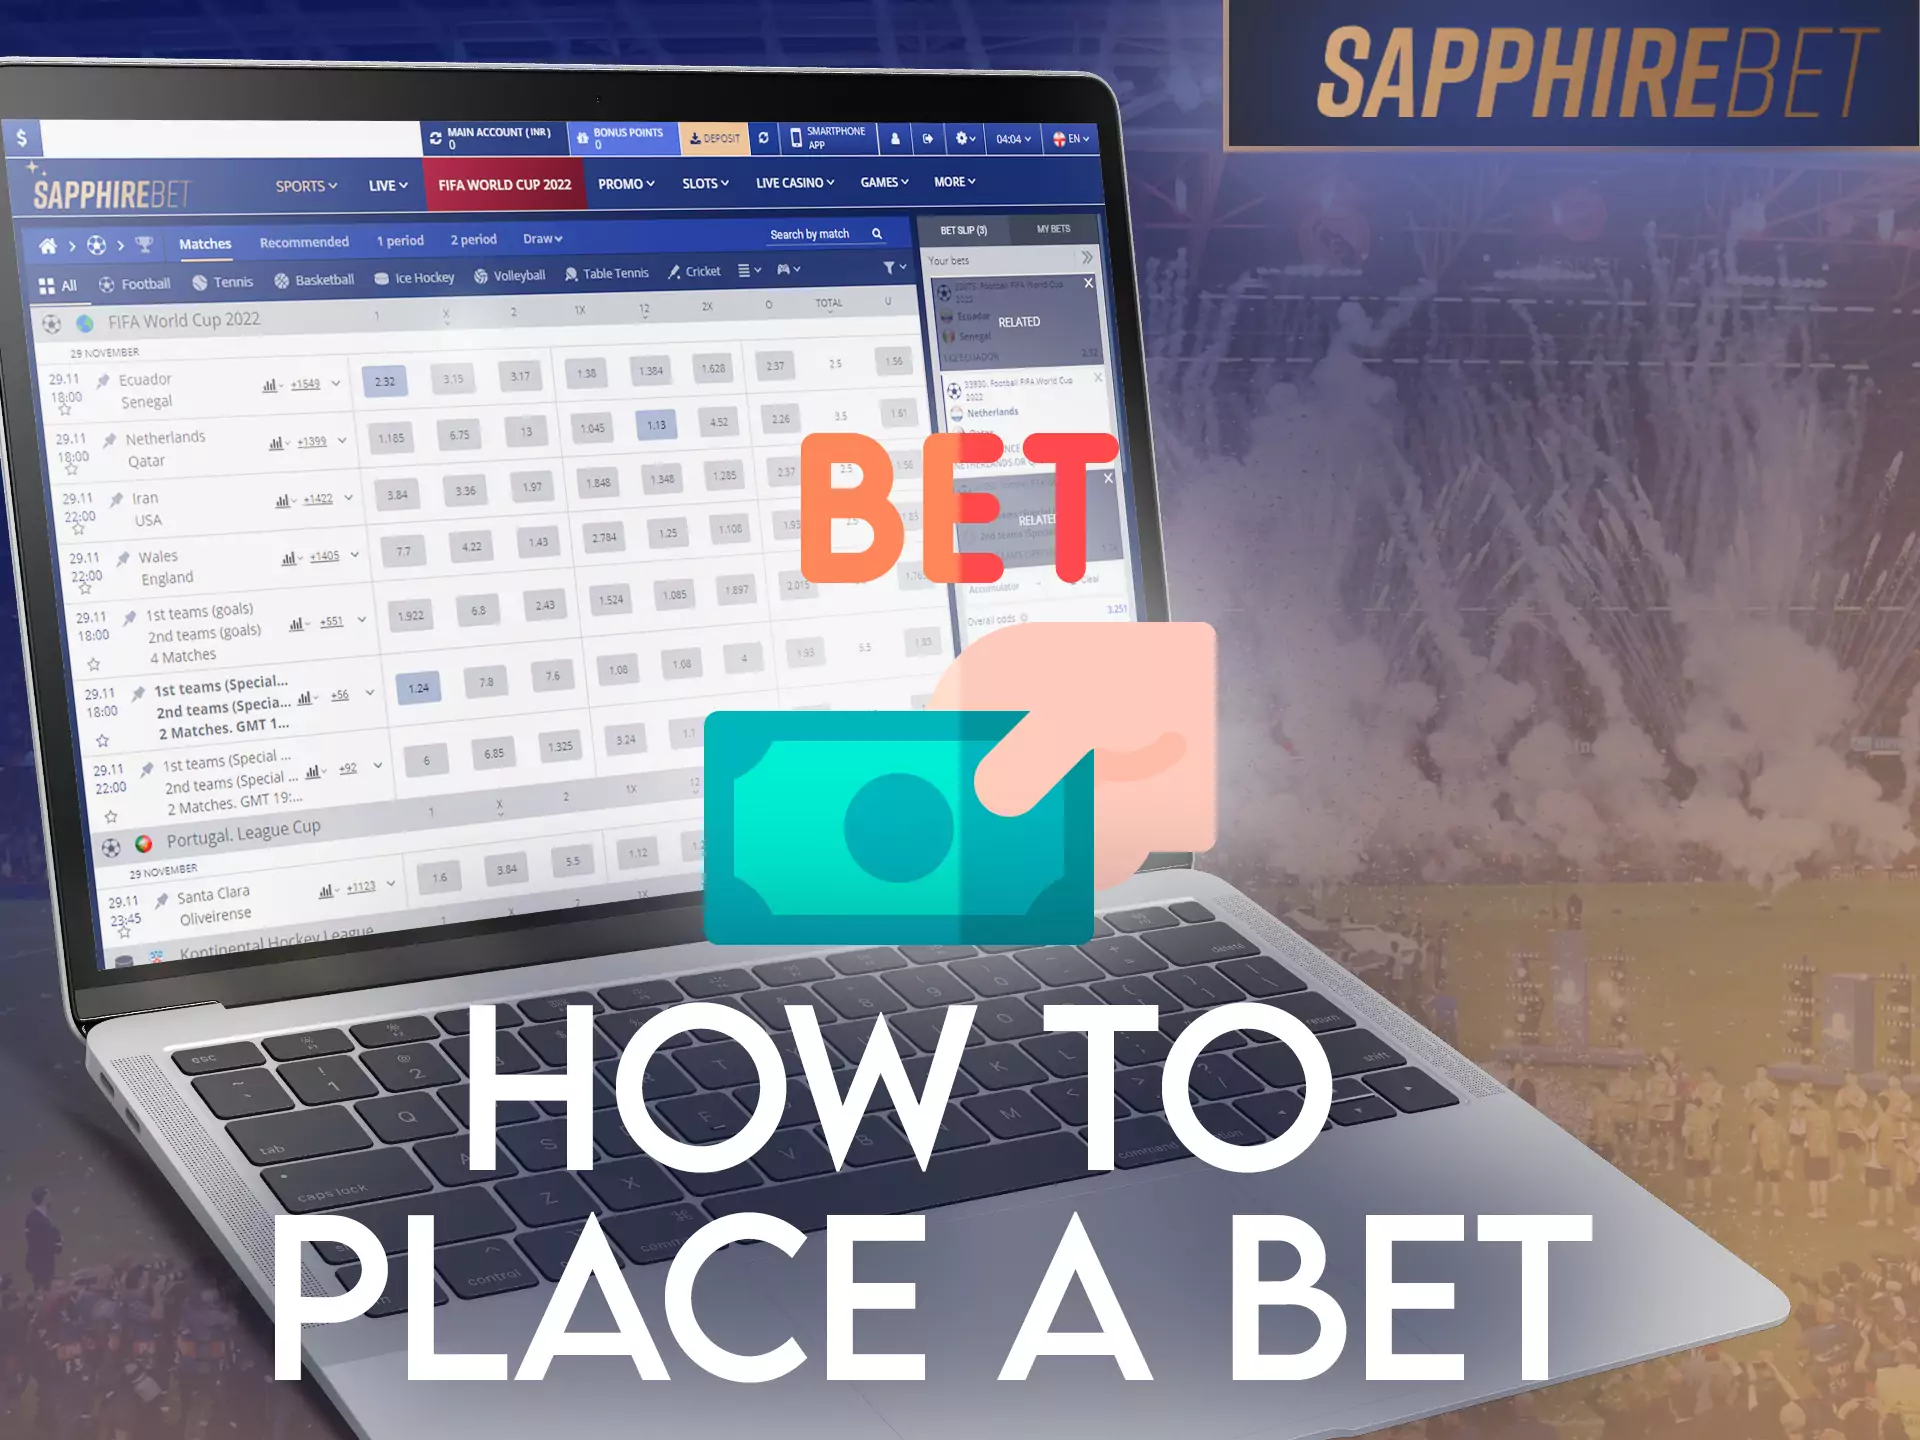 With this instruction, learn how to bet in Sapphirebet, play with pleasure.